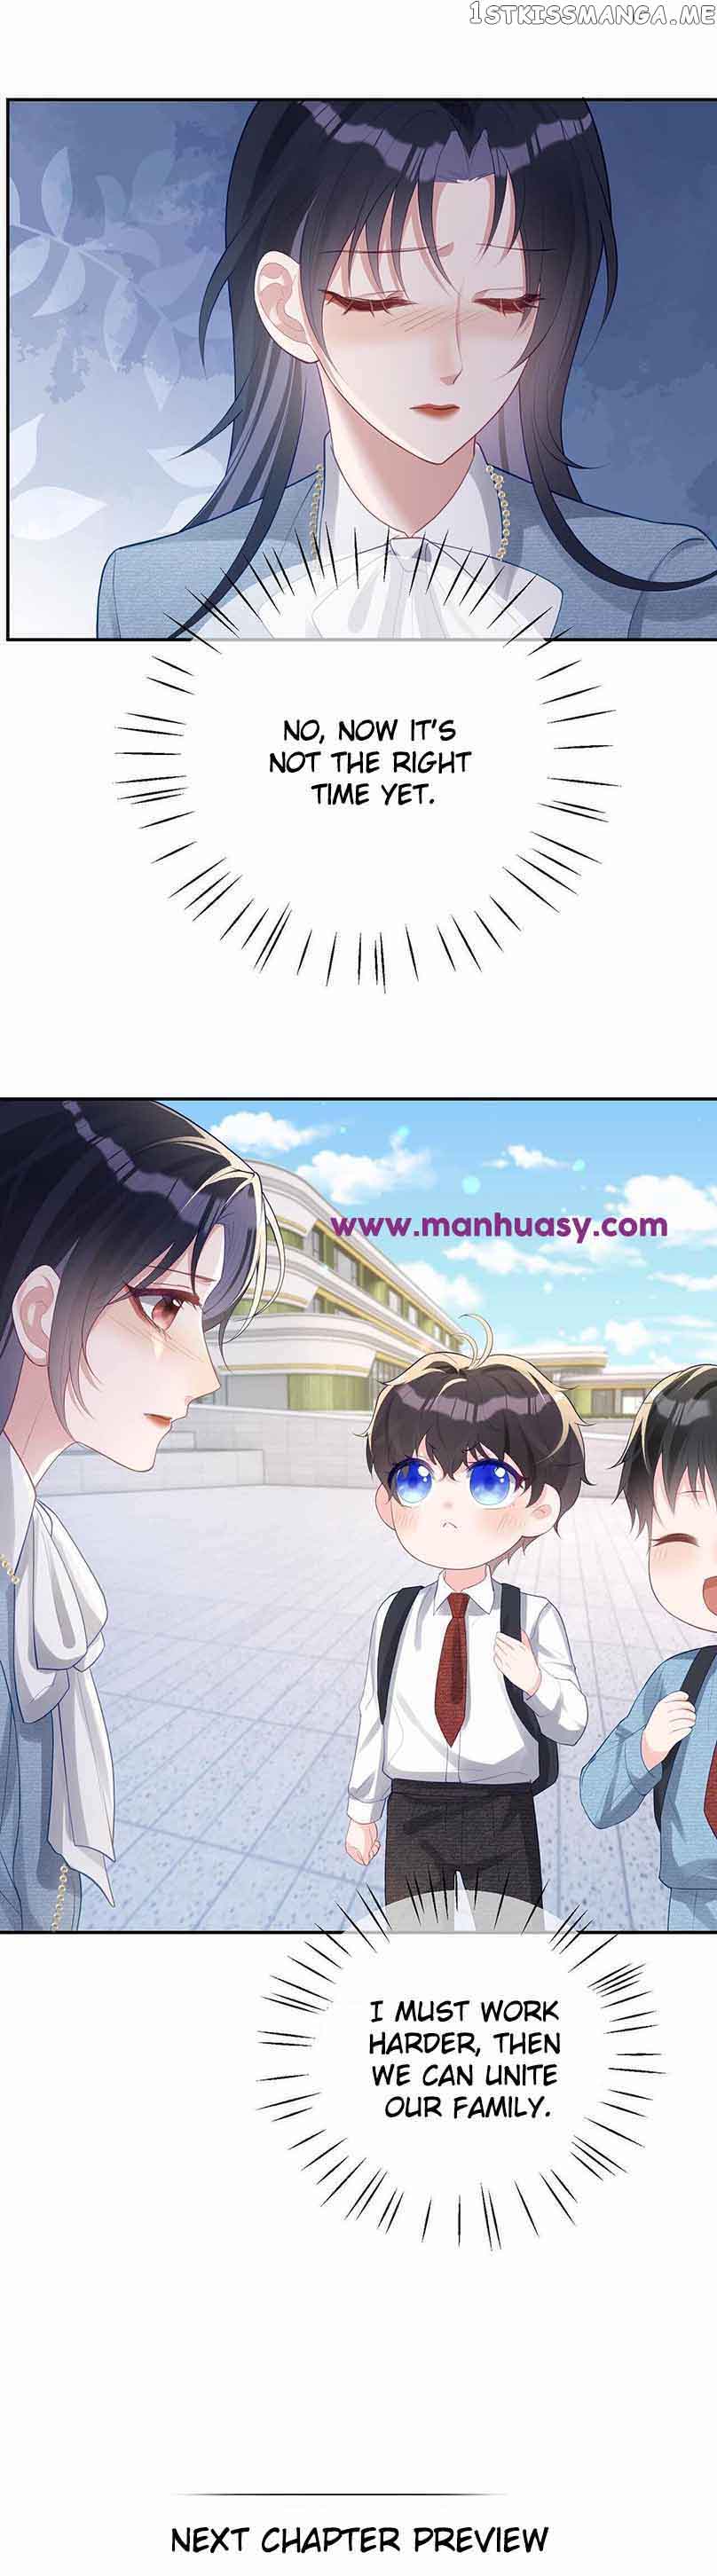 Cute Baby From Heaven: Daddy is Too Strong chapter 34